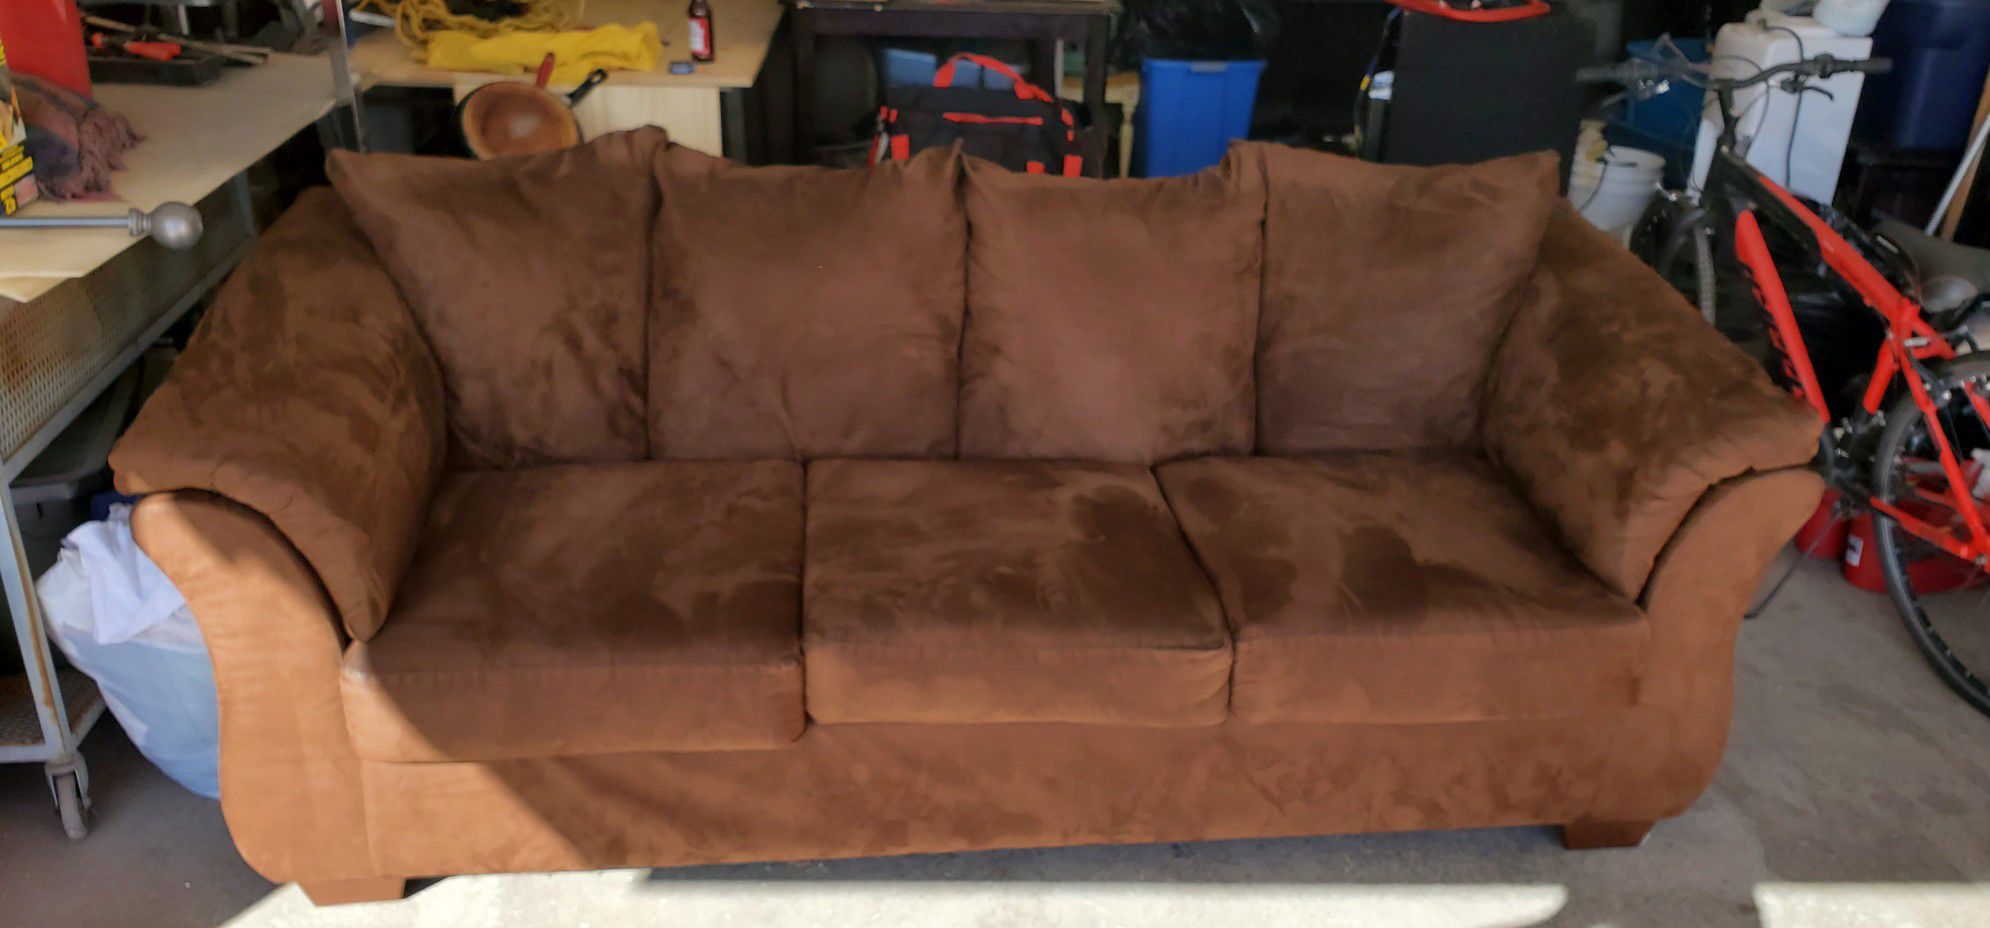 Couch, loveseat & 3 pillows